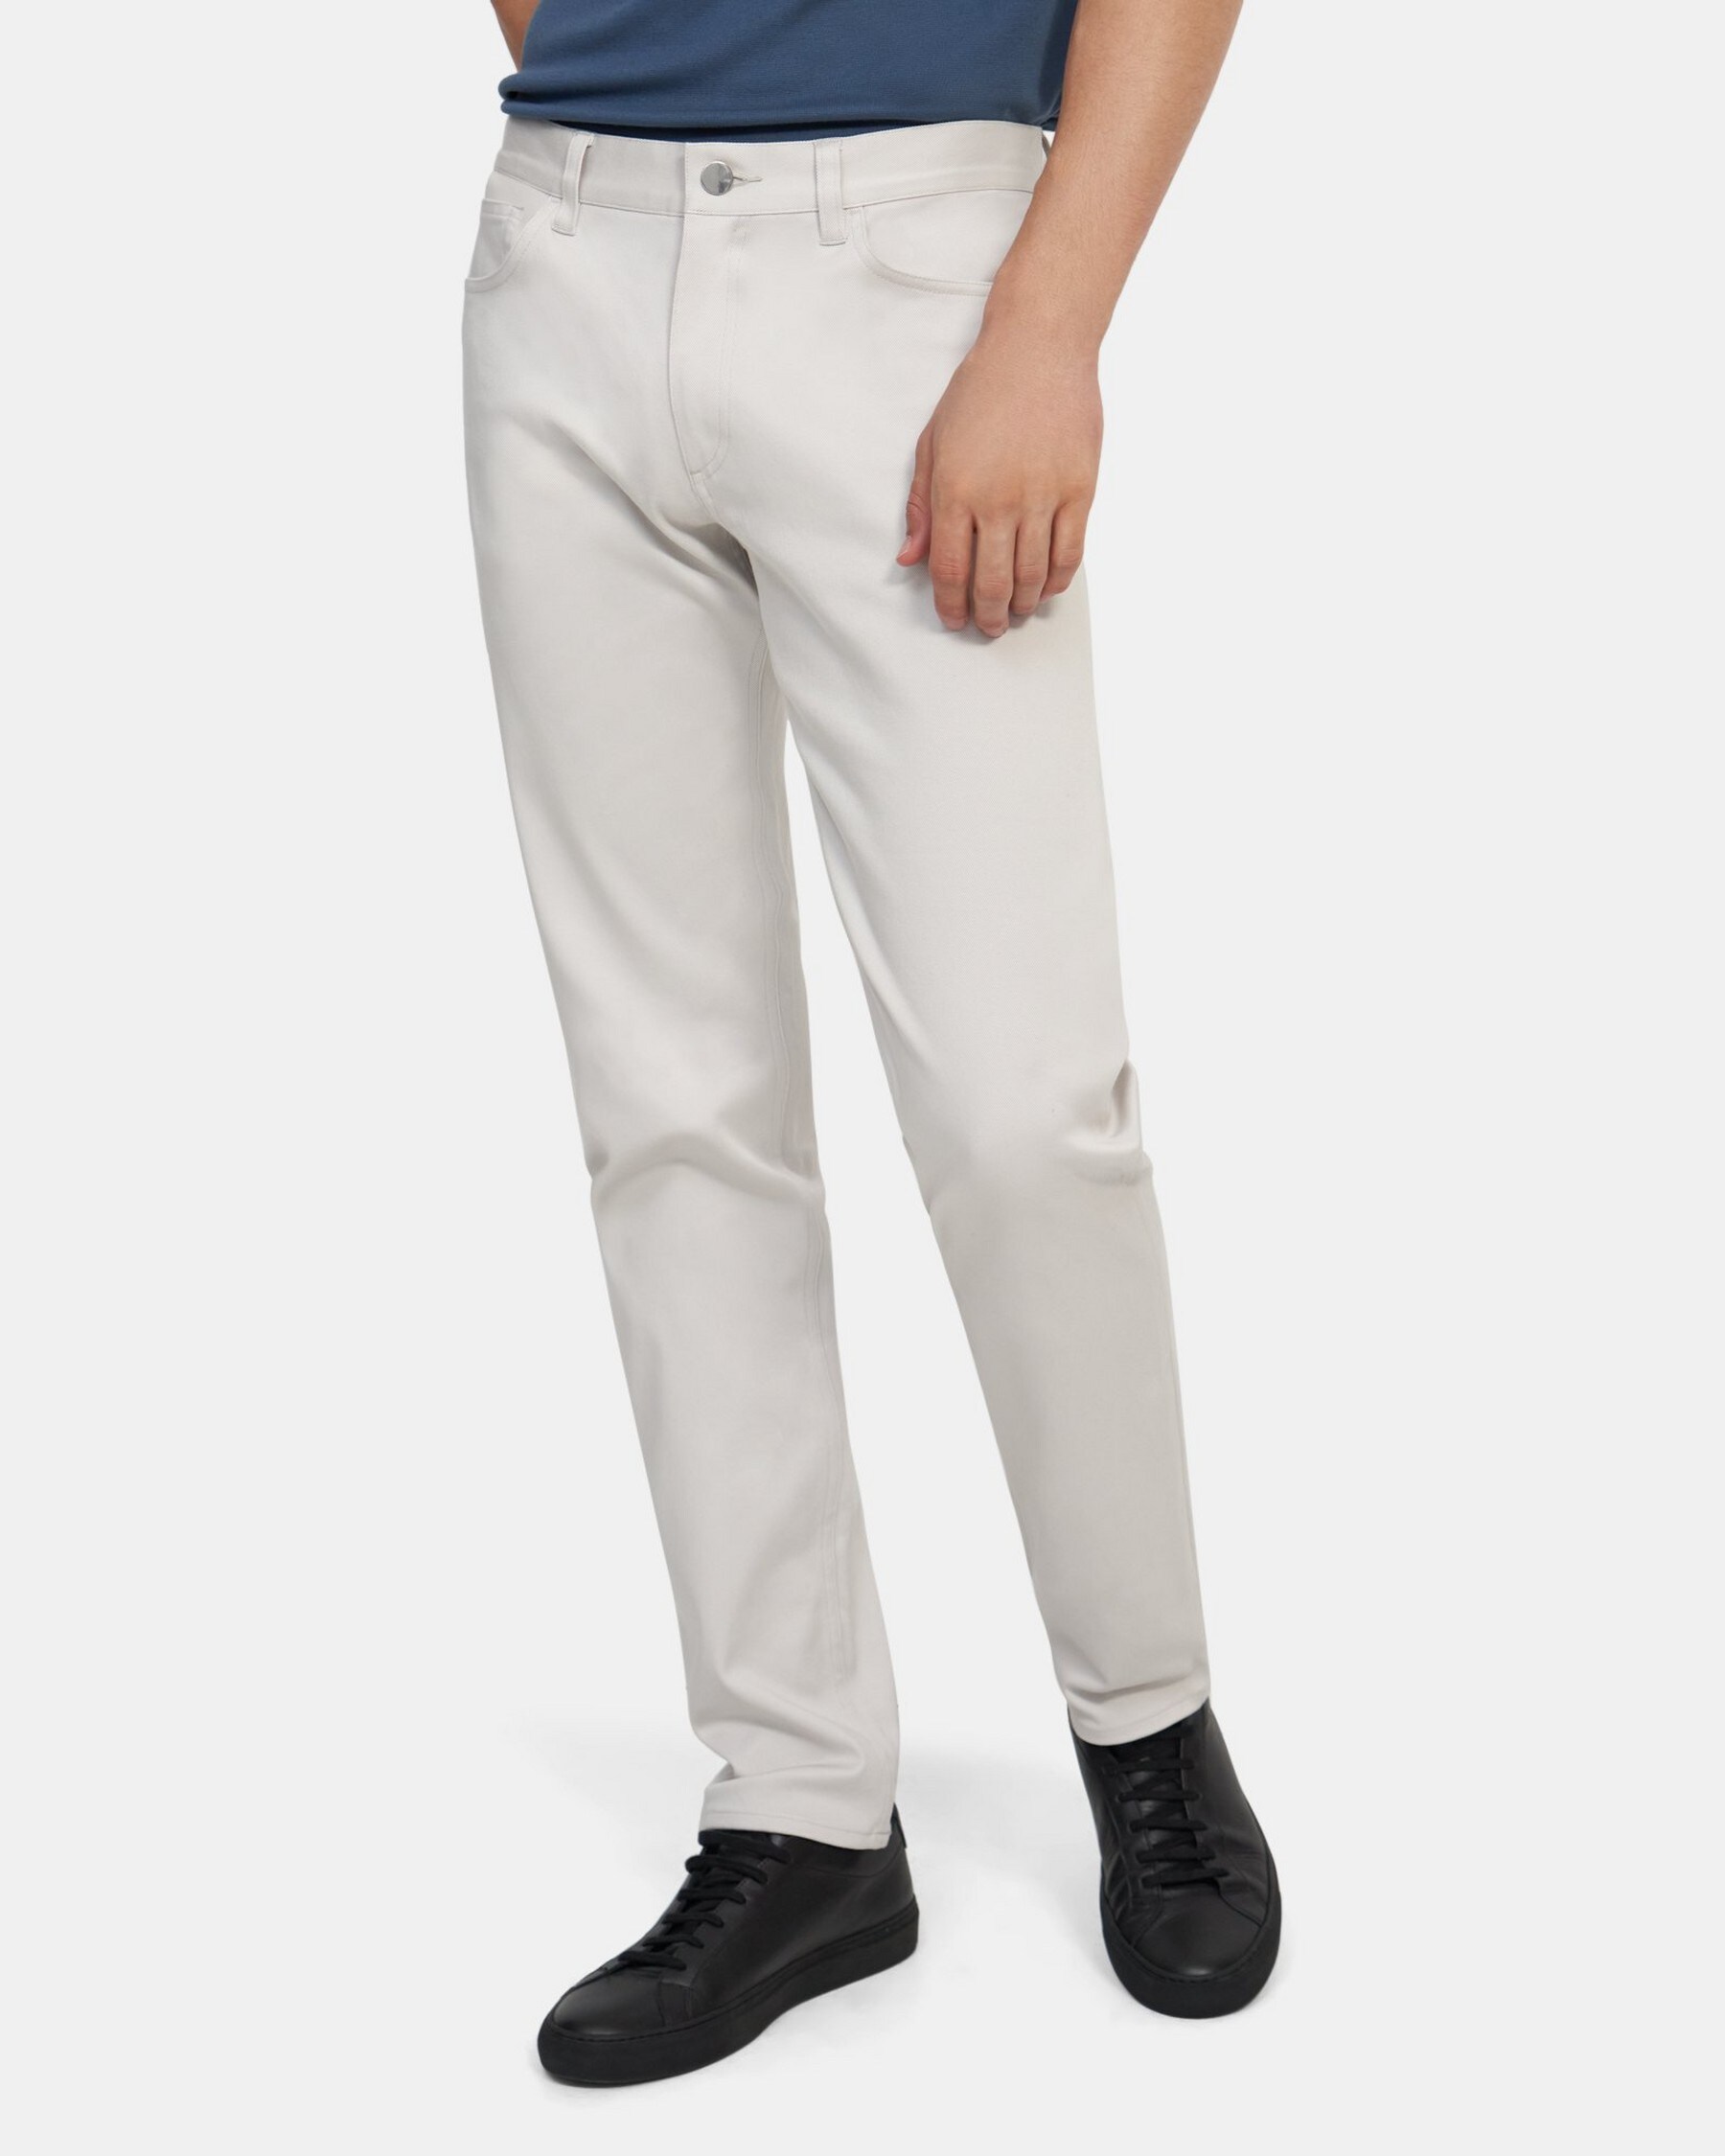 Slim-Fit Five-Pocket Pant in Stretch Cotton Twill